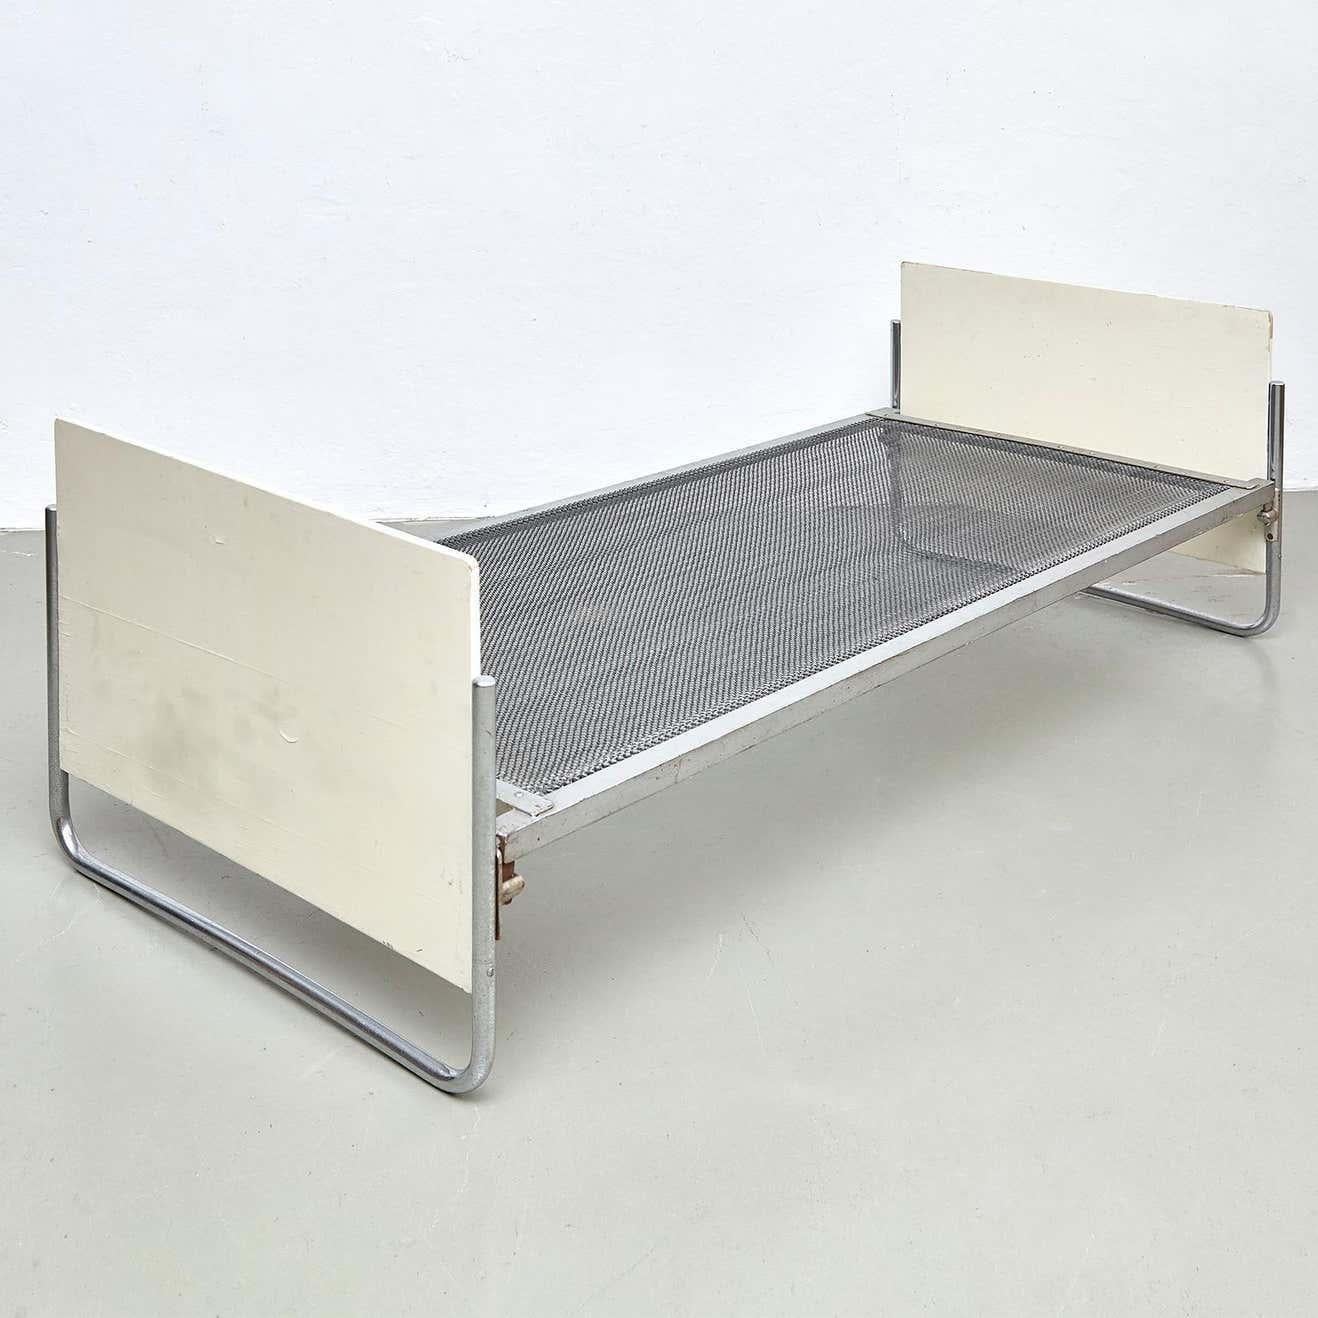 Early Bauhaus bed model 756.1, manufactured by Gispen, (Netherlands), circa 1930.
Metal tube, steel and lacquered wood.

In original condition, with some wear consistent with age and use, preserving a beautiful patina.
The paint has some